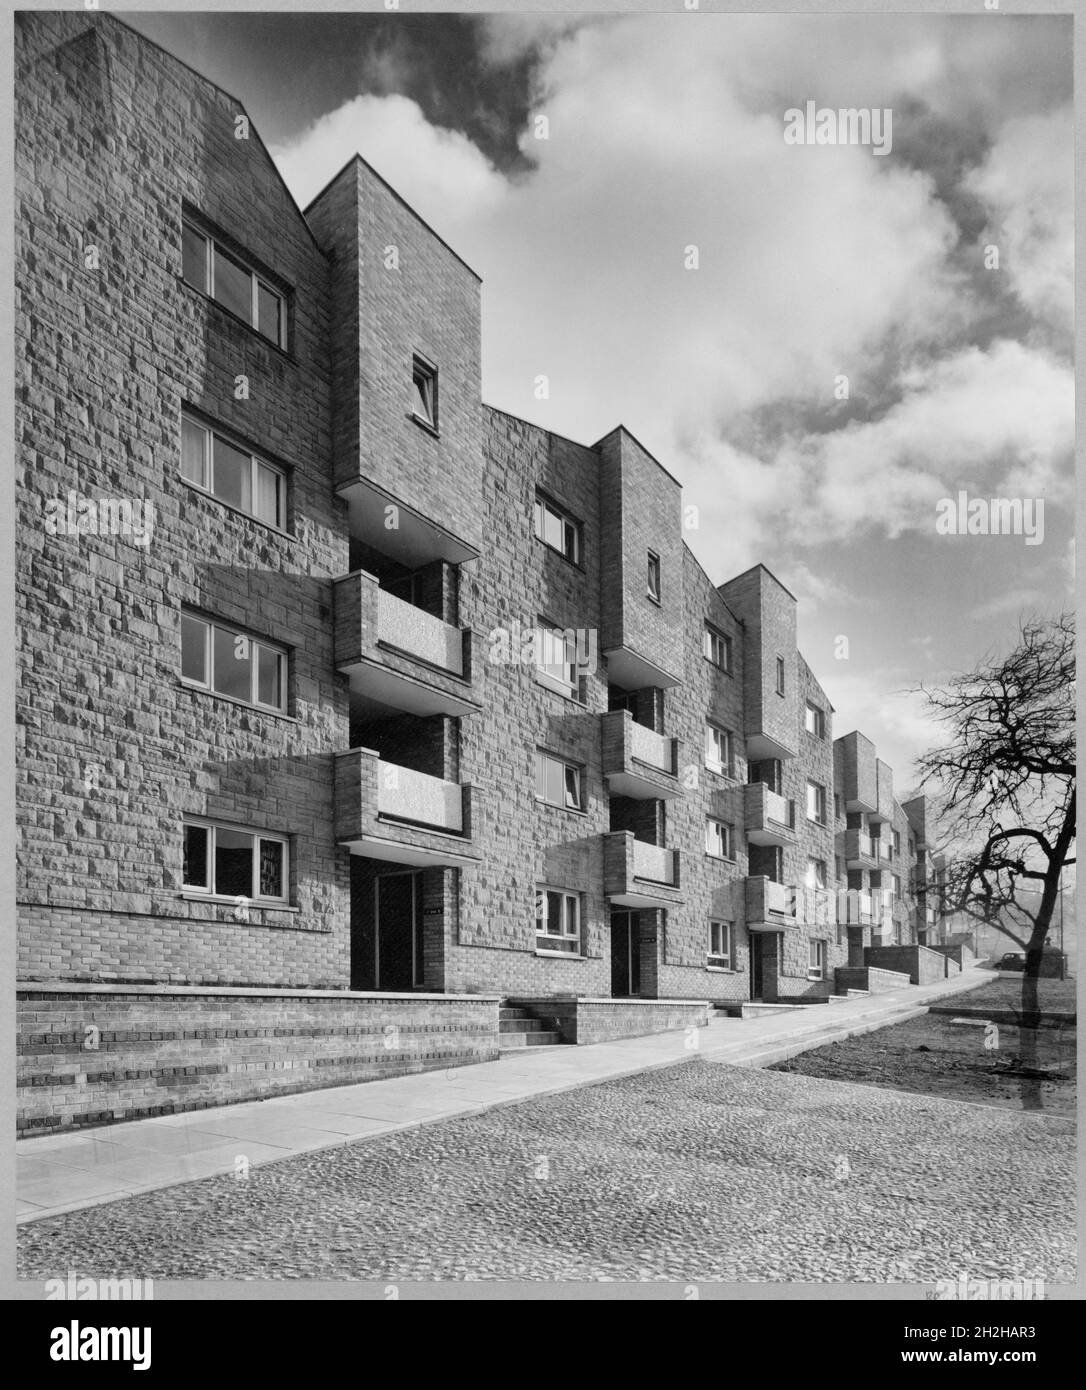 Westgate House, Clayport Street, Alnwick, Northumberland, 1960-1979. Exterior of 7-33 Westgate House, in the parish of Alnwick, Northumberland, facing south along the face of the row of terraced flats, with pedestrian pavement in the foreground. Stock Photo